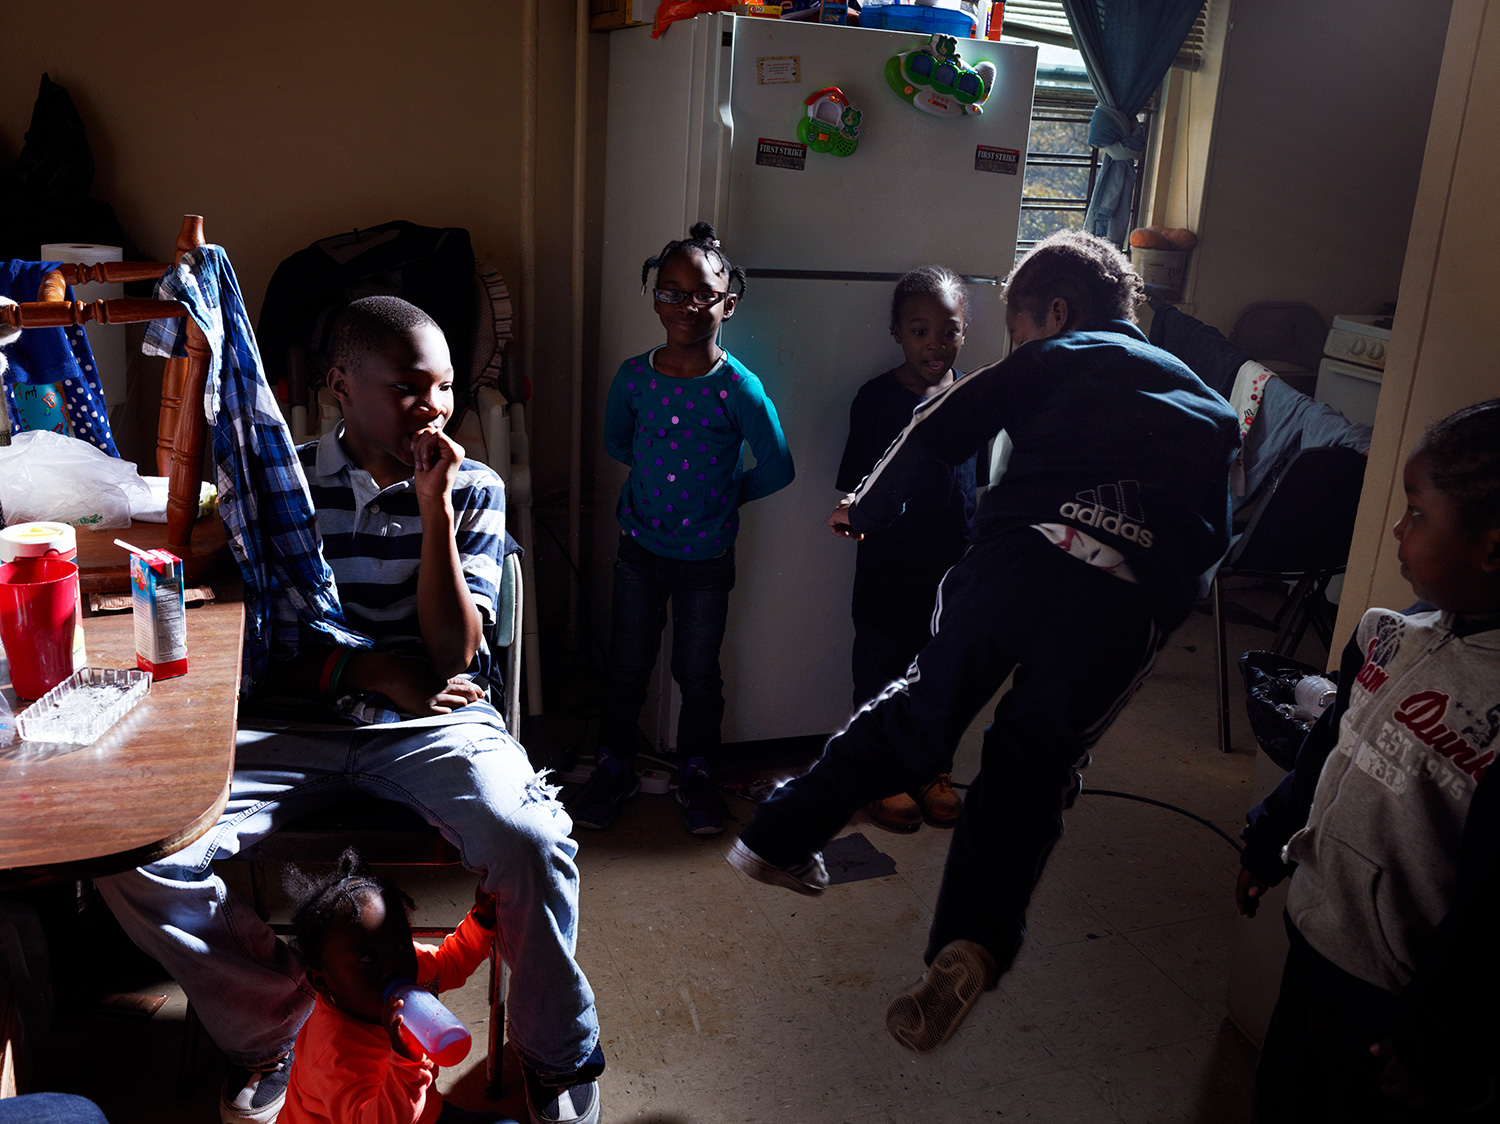 Image: Kingsley Ihim, 12; Markeya Ihim, 15 mos.; Jazzamia Ihim, 7; Martin Ihim, 4; and Shaun Ihim, 5 watch as Kebion, 6 practices his karate moves in the family’s 4th floor kitchen. "I can’t swim," says their mother, Janet, describing her plan to save her children if the flooding worsened the night of the storm. "But I have bins, so I got the bins out and I was going to out them in there and let them float to safety. Put the top on and poke a little hole for air and put their Medicaid cards in their pockets so they’d know who they are."